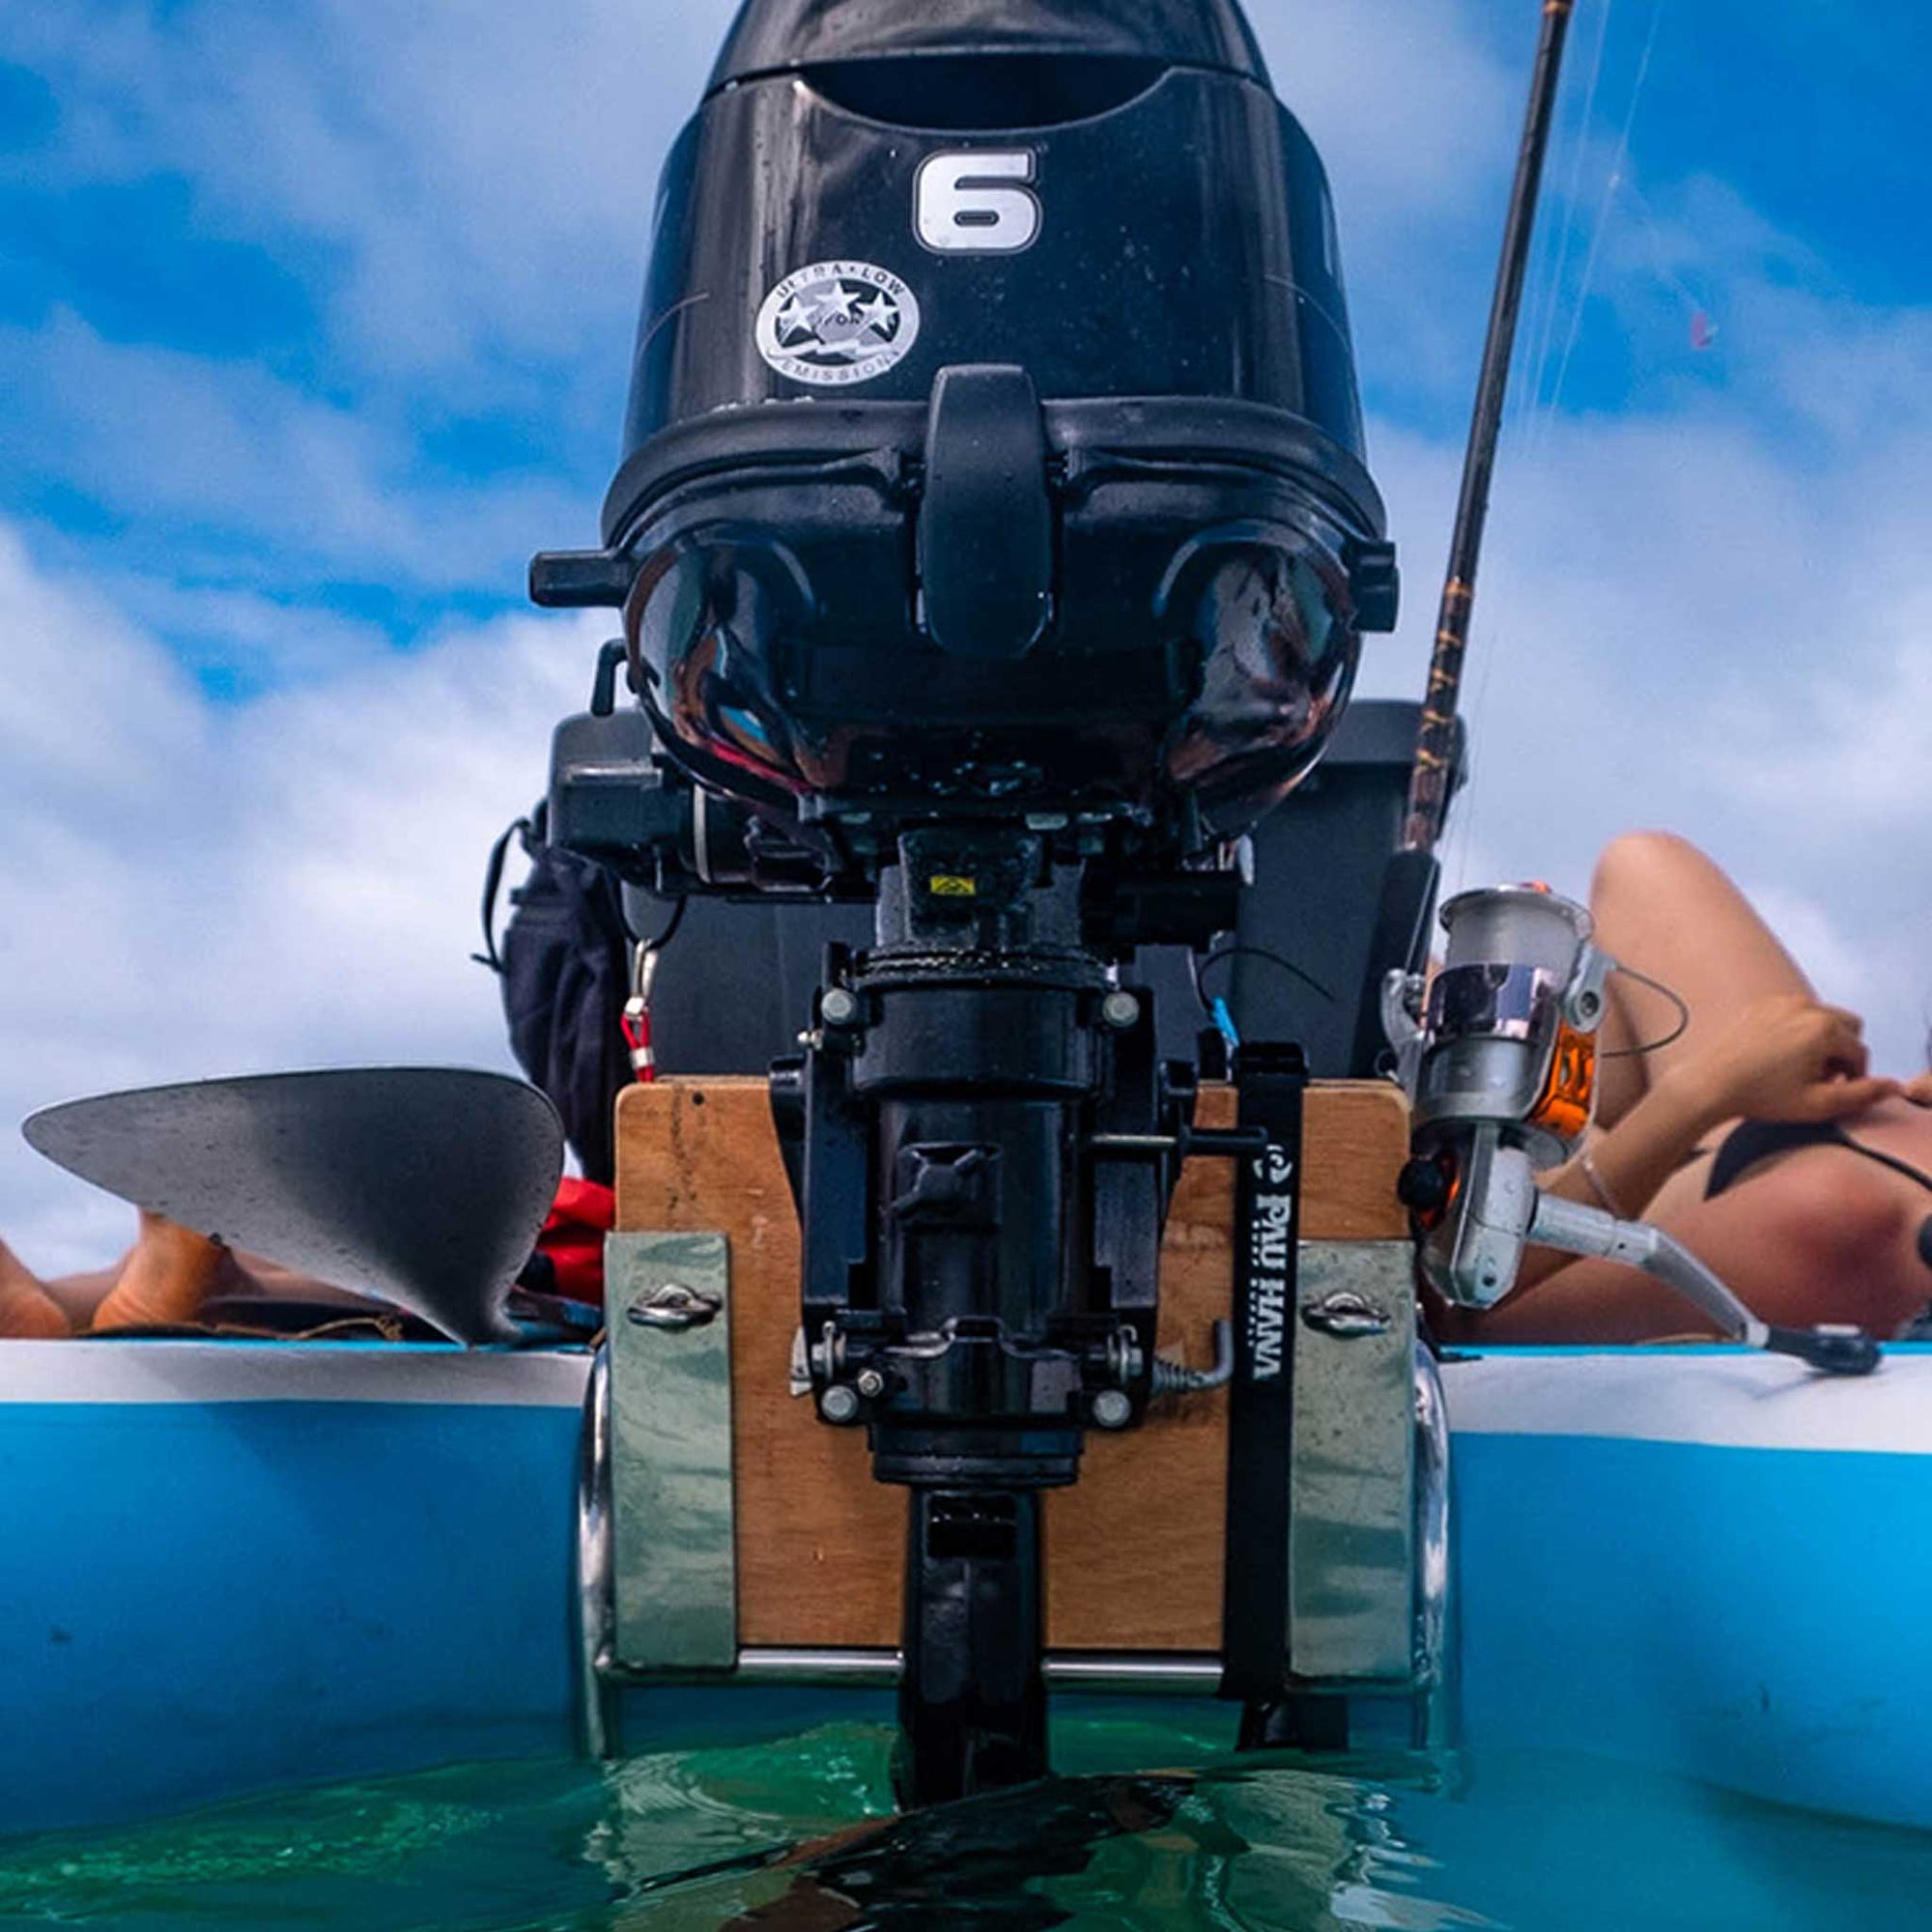 a four stroke engine attached to the back of a giant inflatable paddleboard